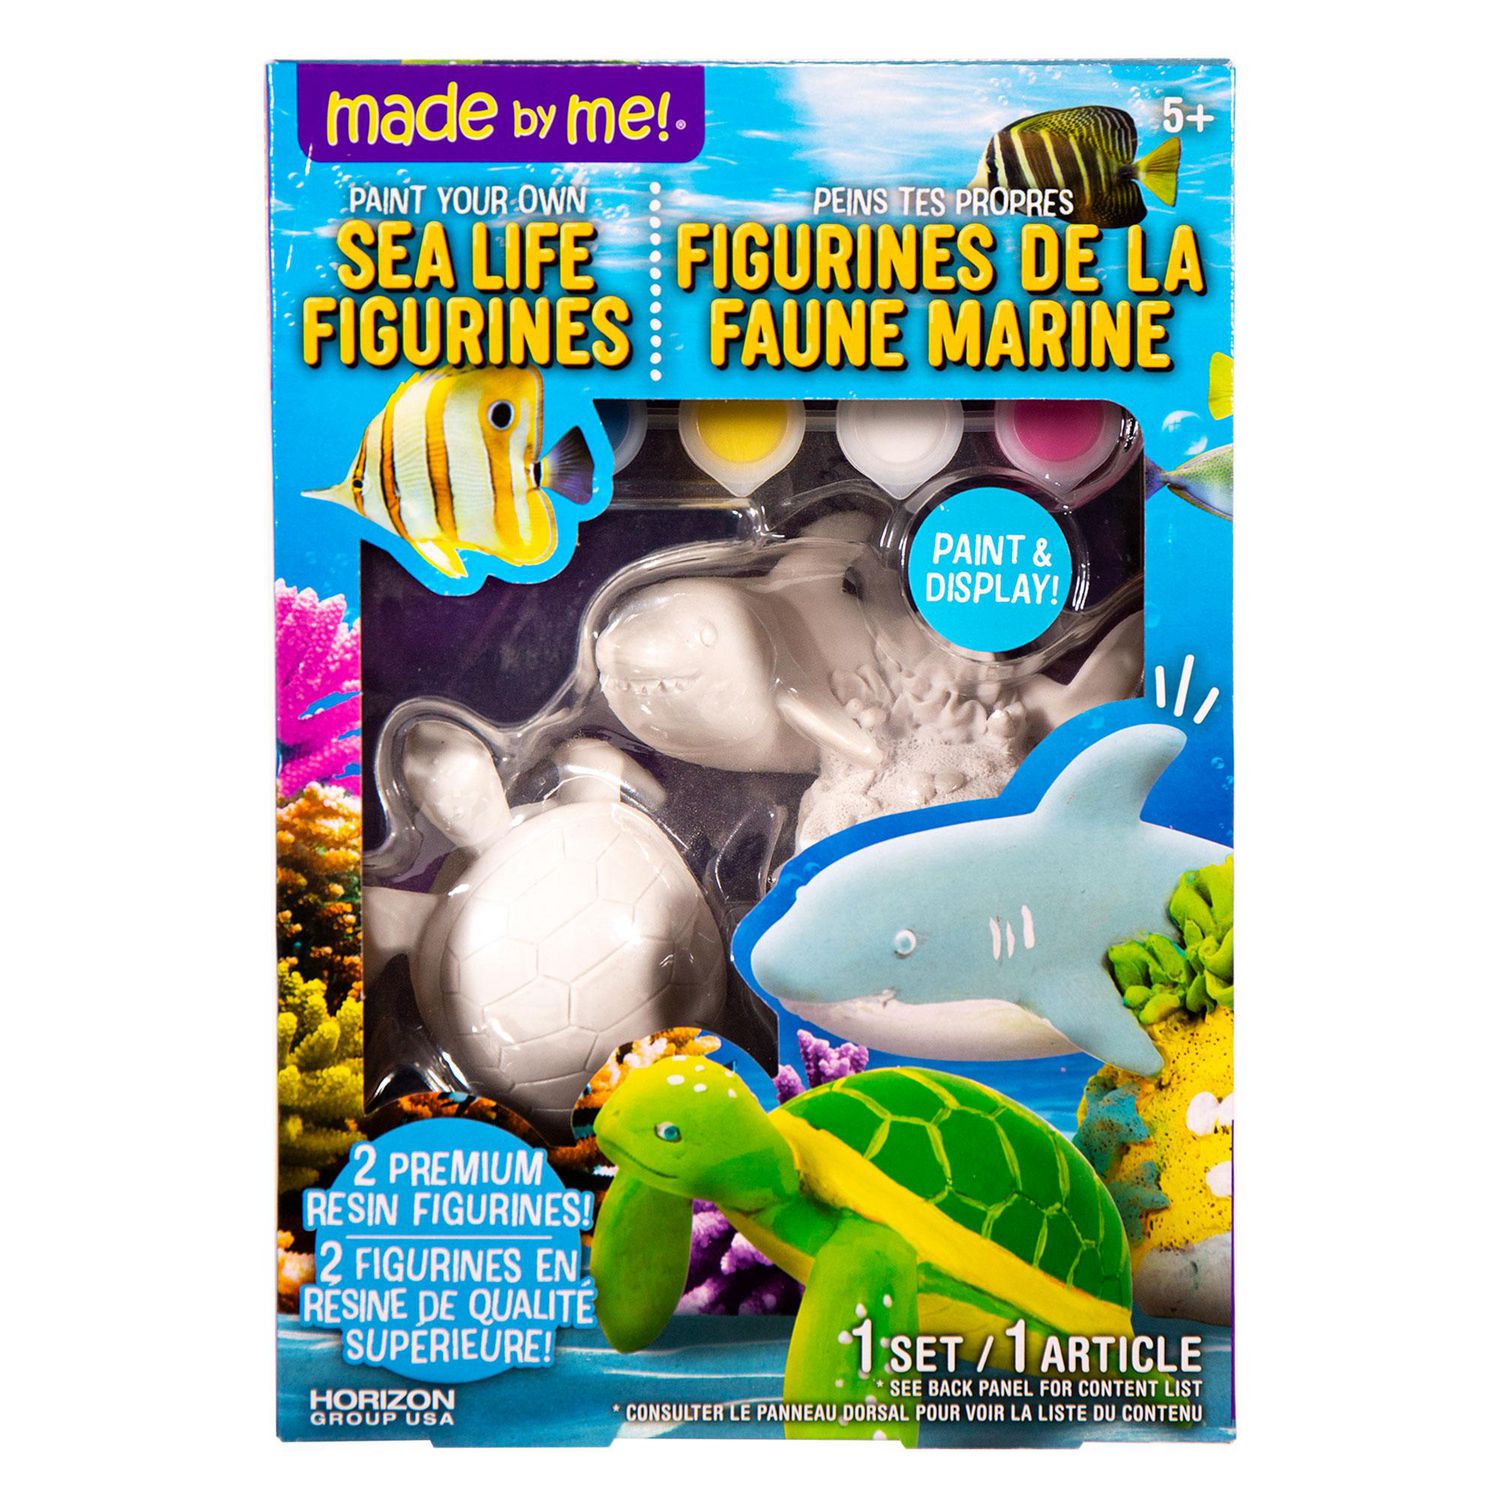 Paint Your Own Sea Life Figurines | Walmart Canada